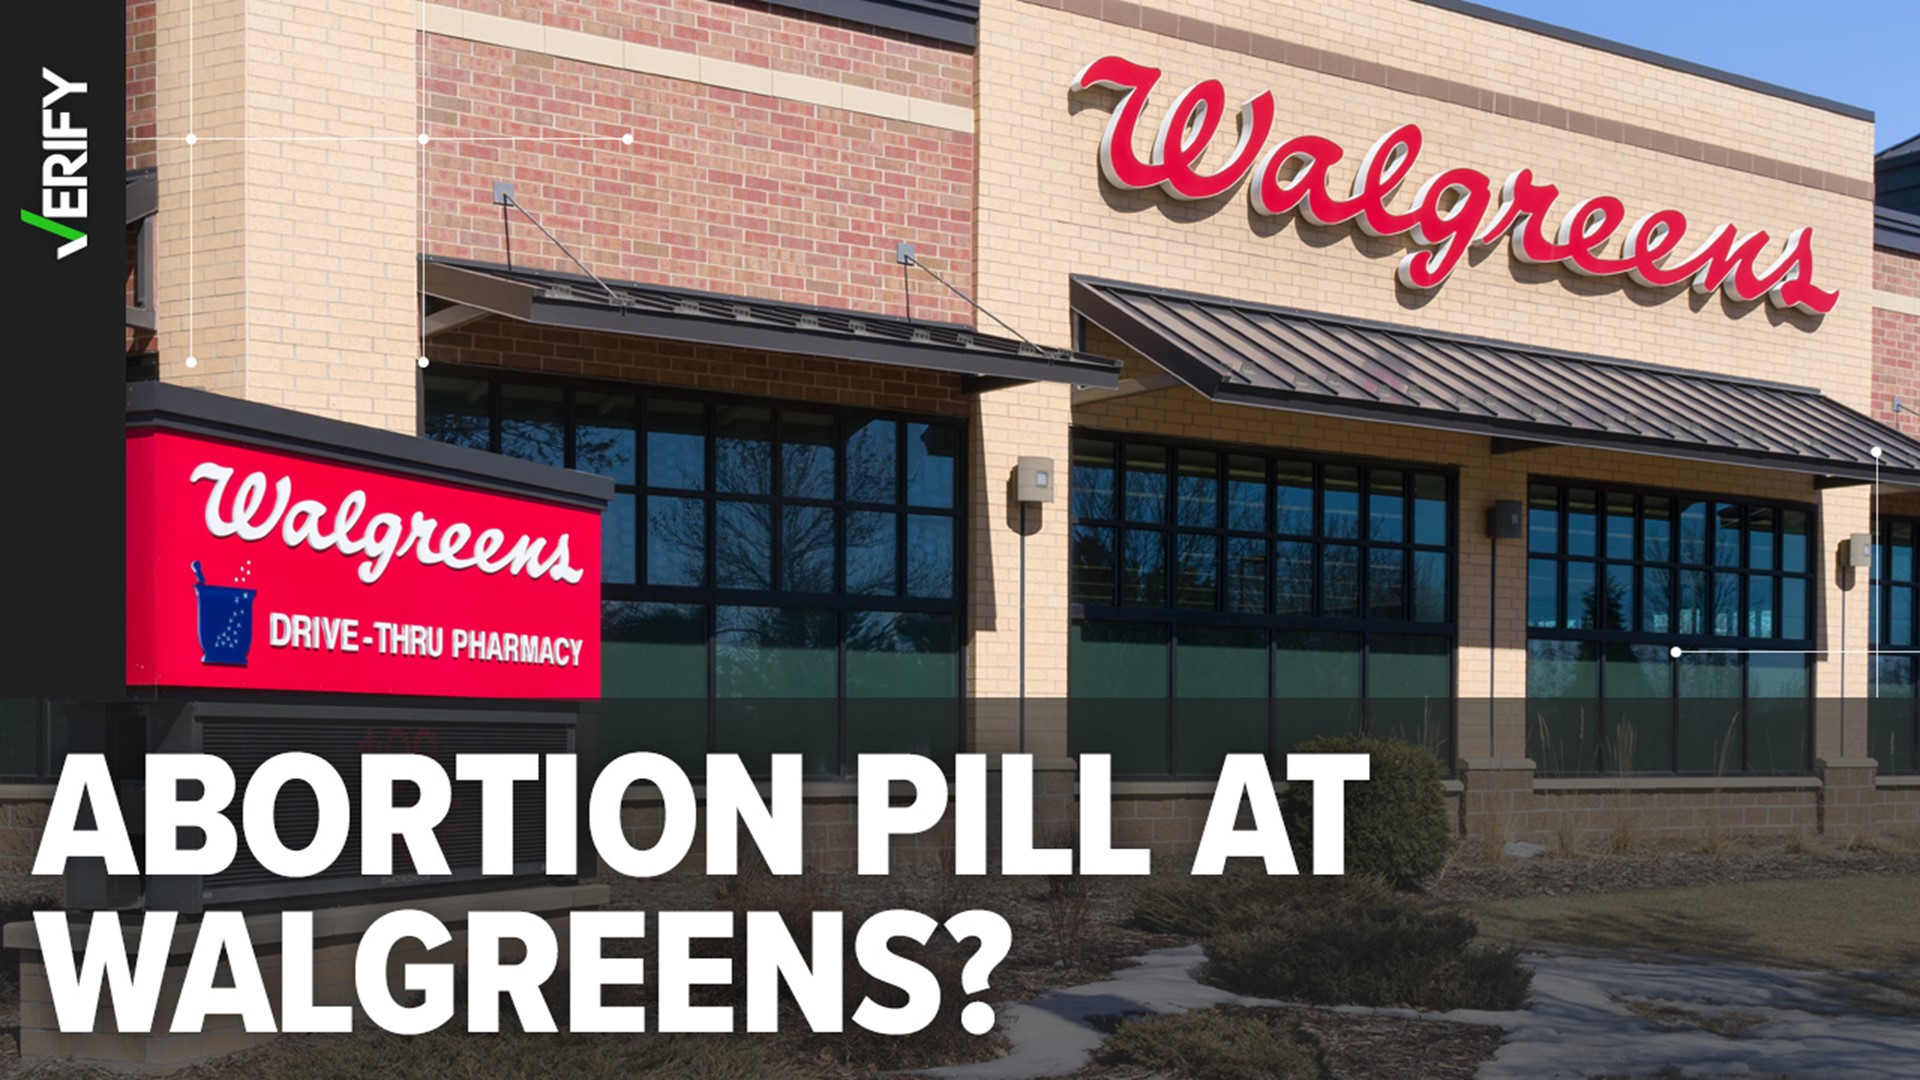 Walgreens has issued seemingly contradictory statements on where it plans to dispense mifepristone, a pill used for medication abortions. Here’s what we can VERIFY.